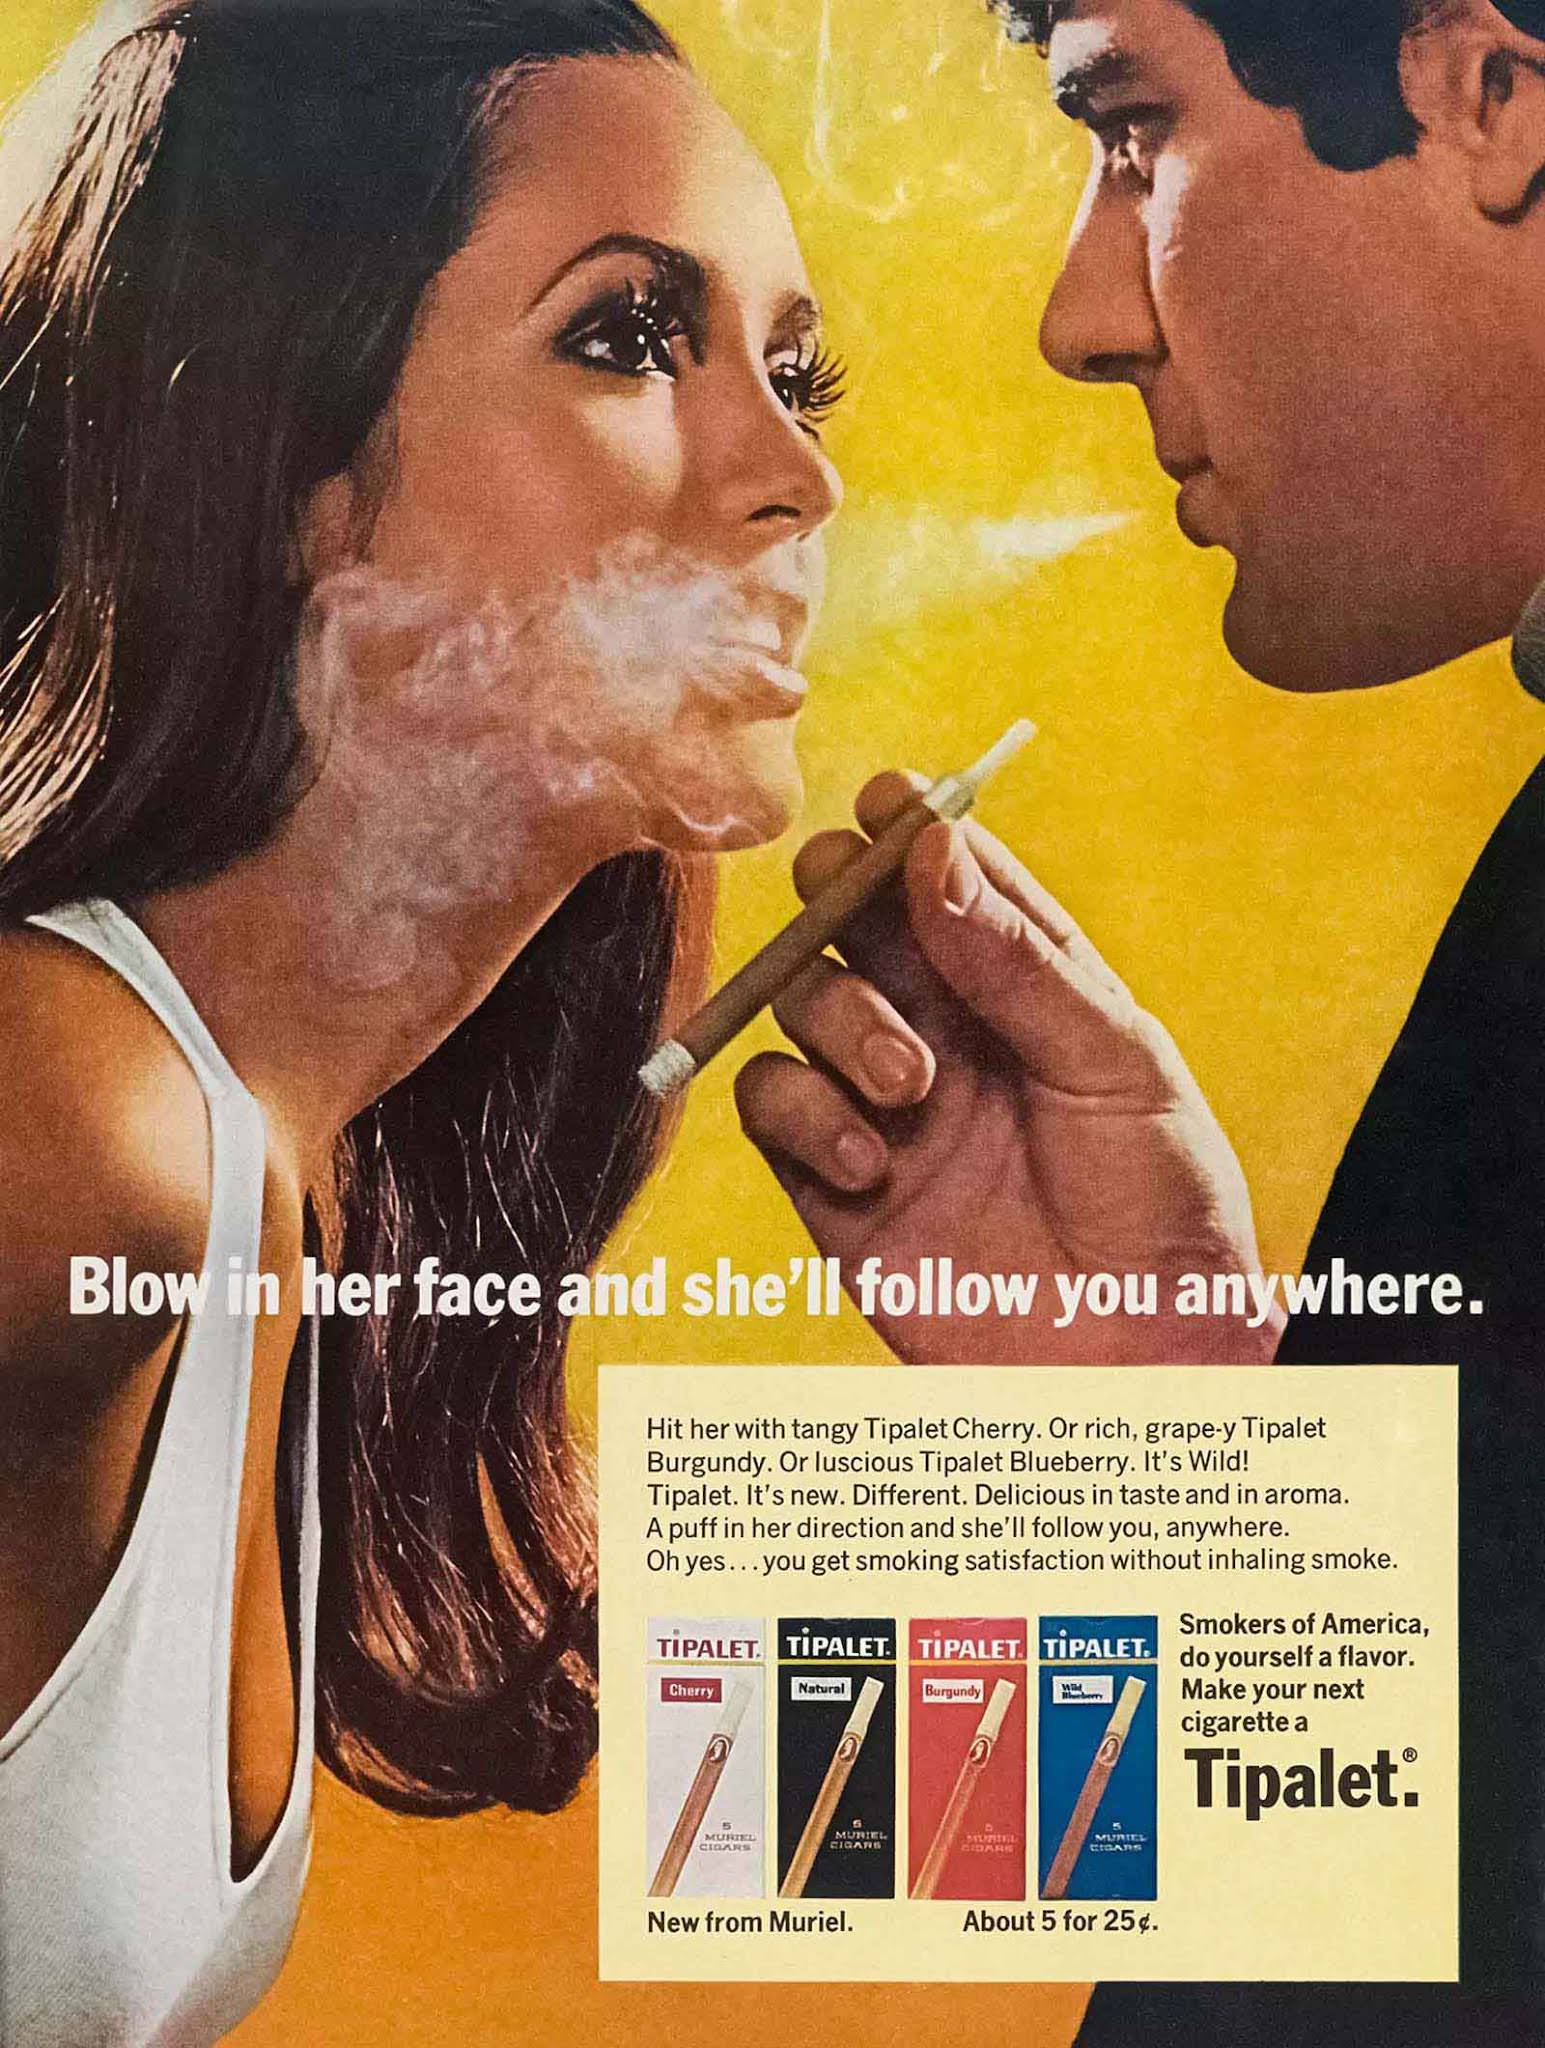 Blow in her face and she’ll follow you anywhere. By Tipalet in the 1960s.